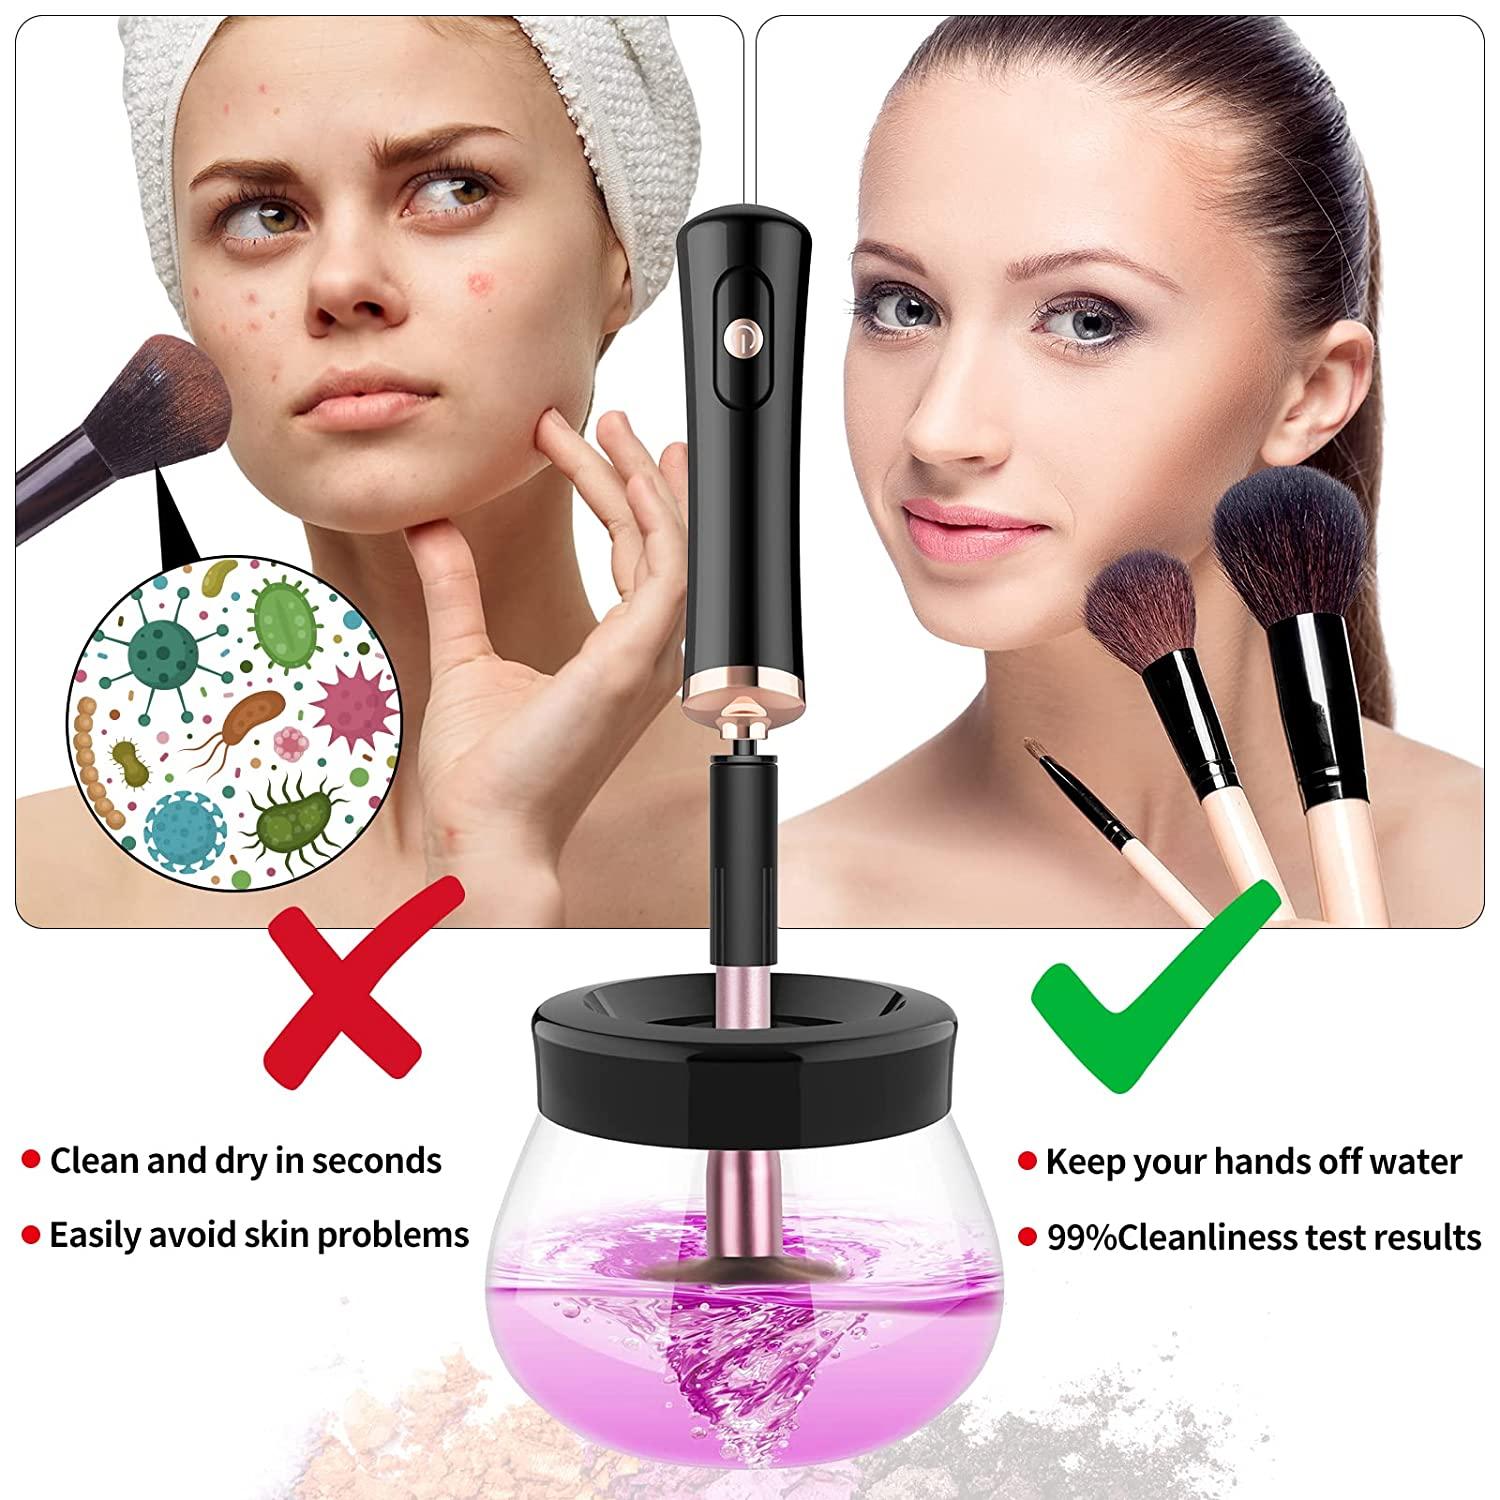 Electric Makeup Brush Cleaner Automatic Make Up Brush Cleaner